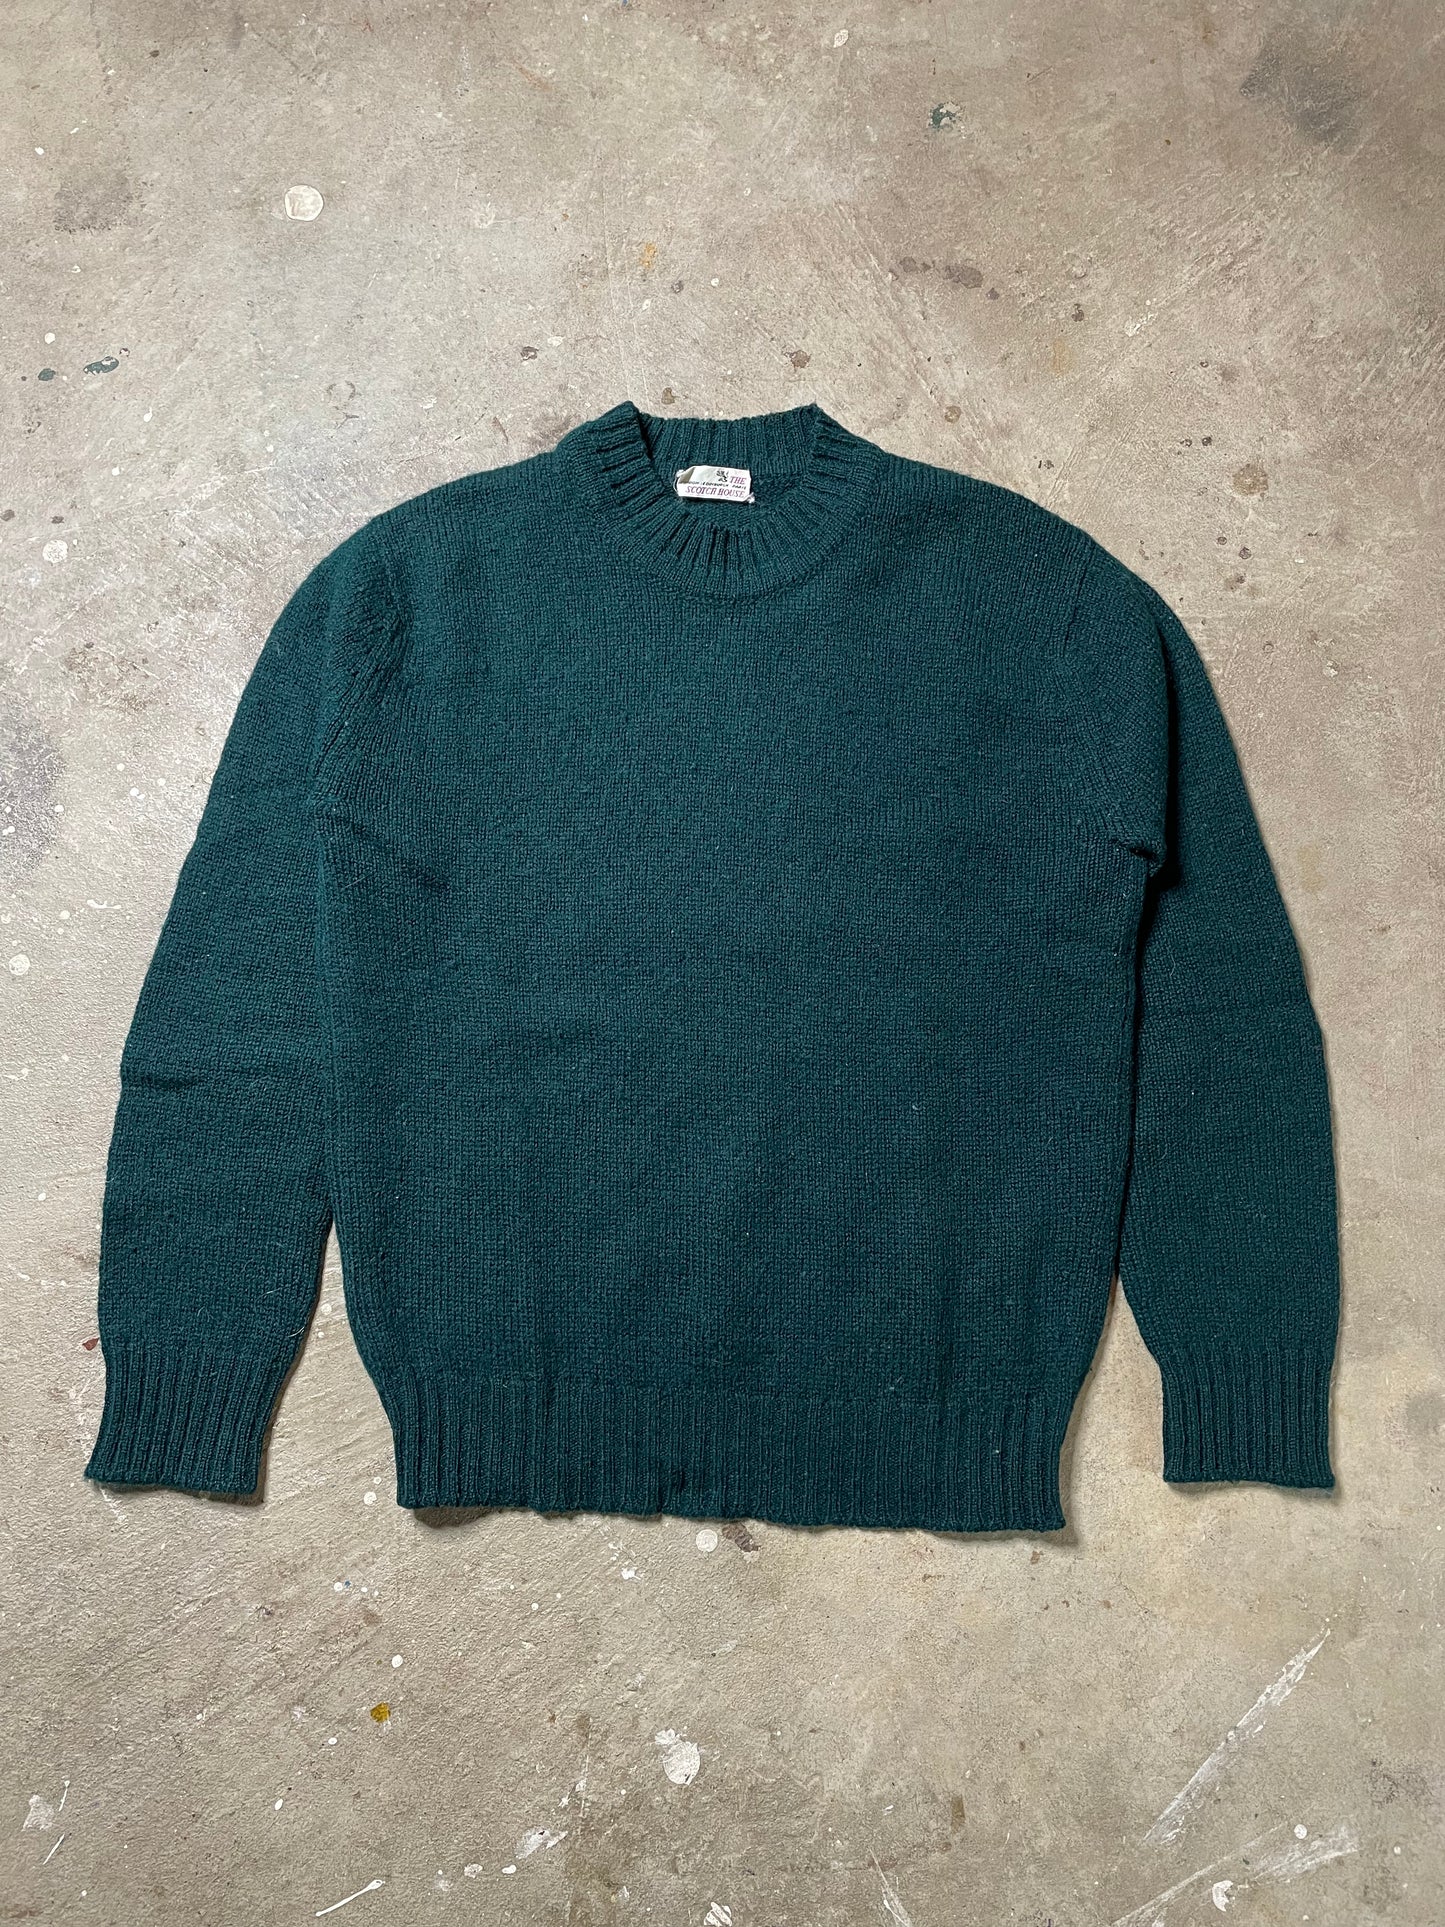 Vintage The Scotch House Wool Sweater